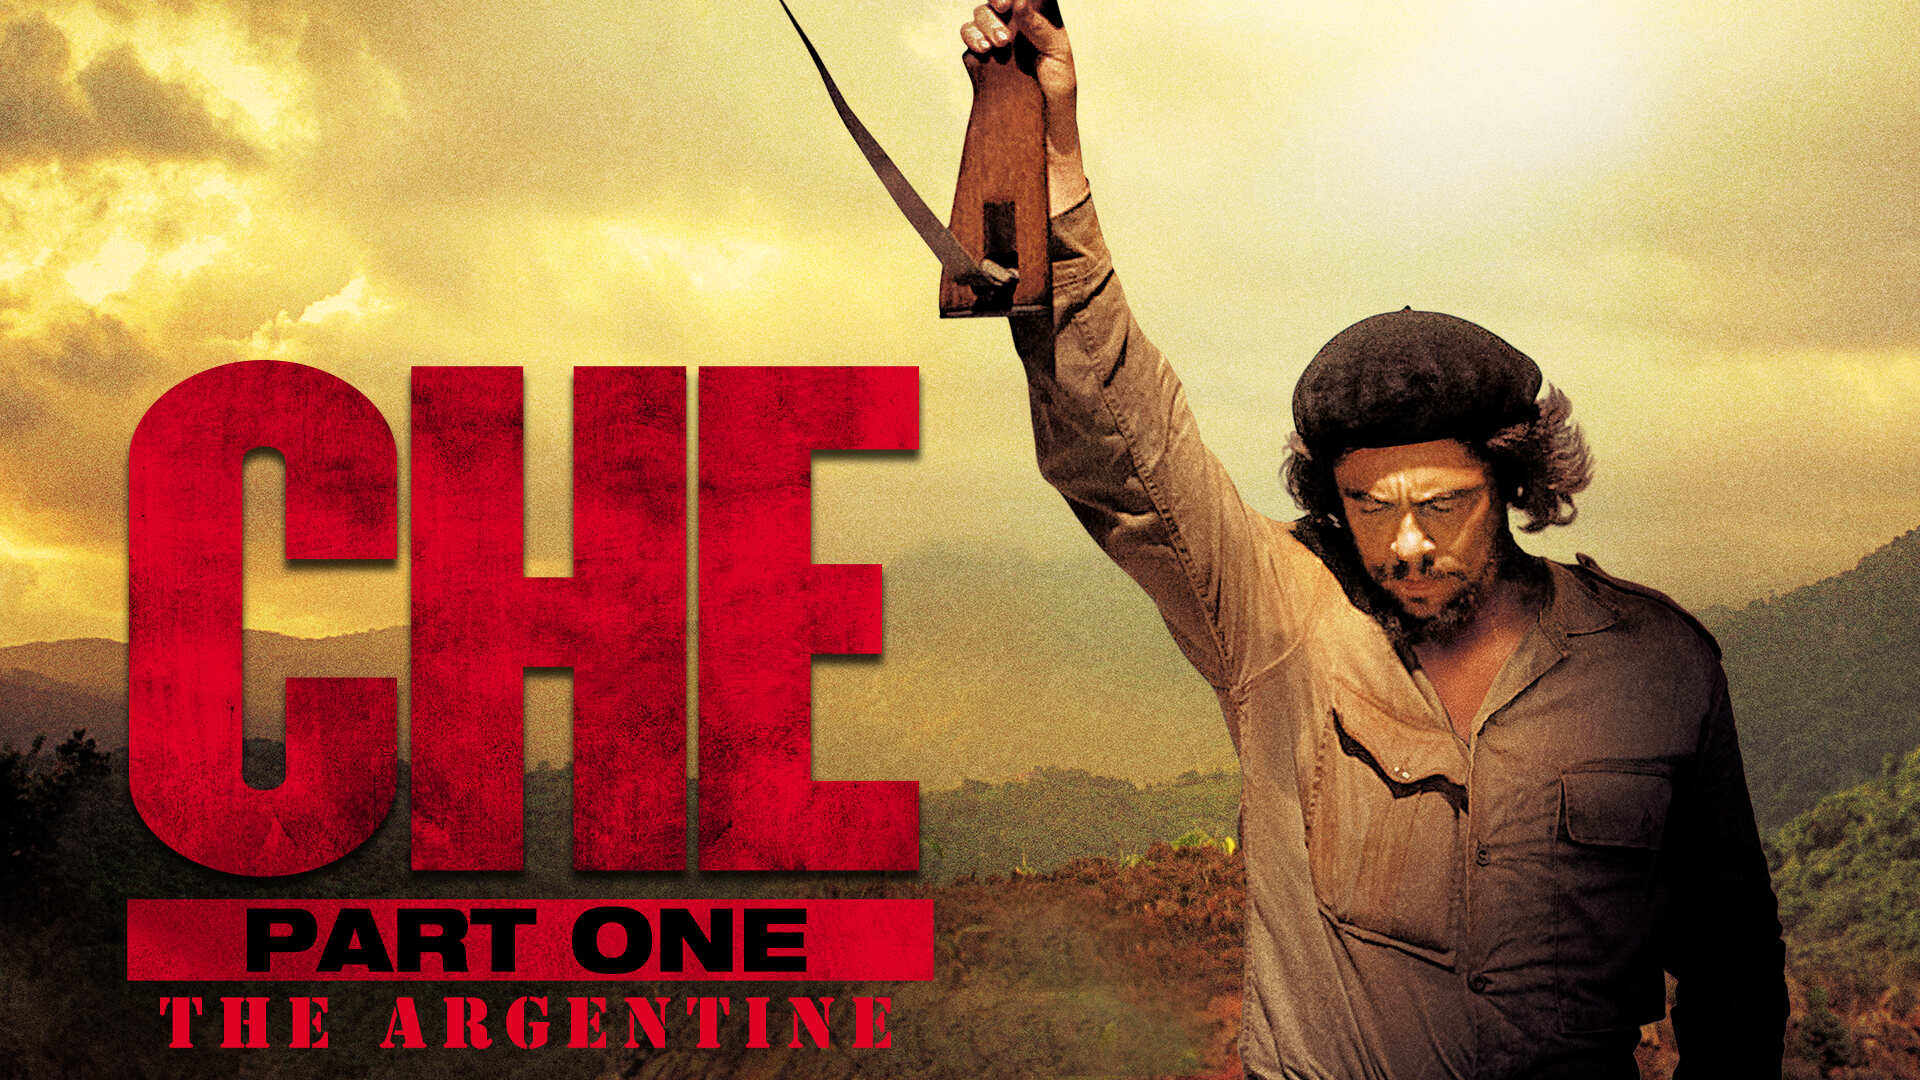 34-facts-about-the-movie-che-part-one